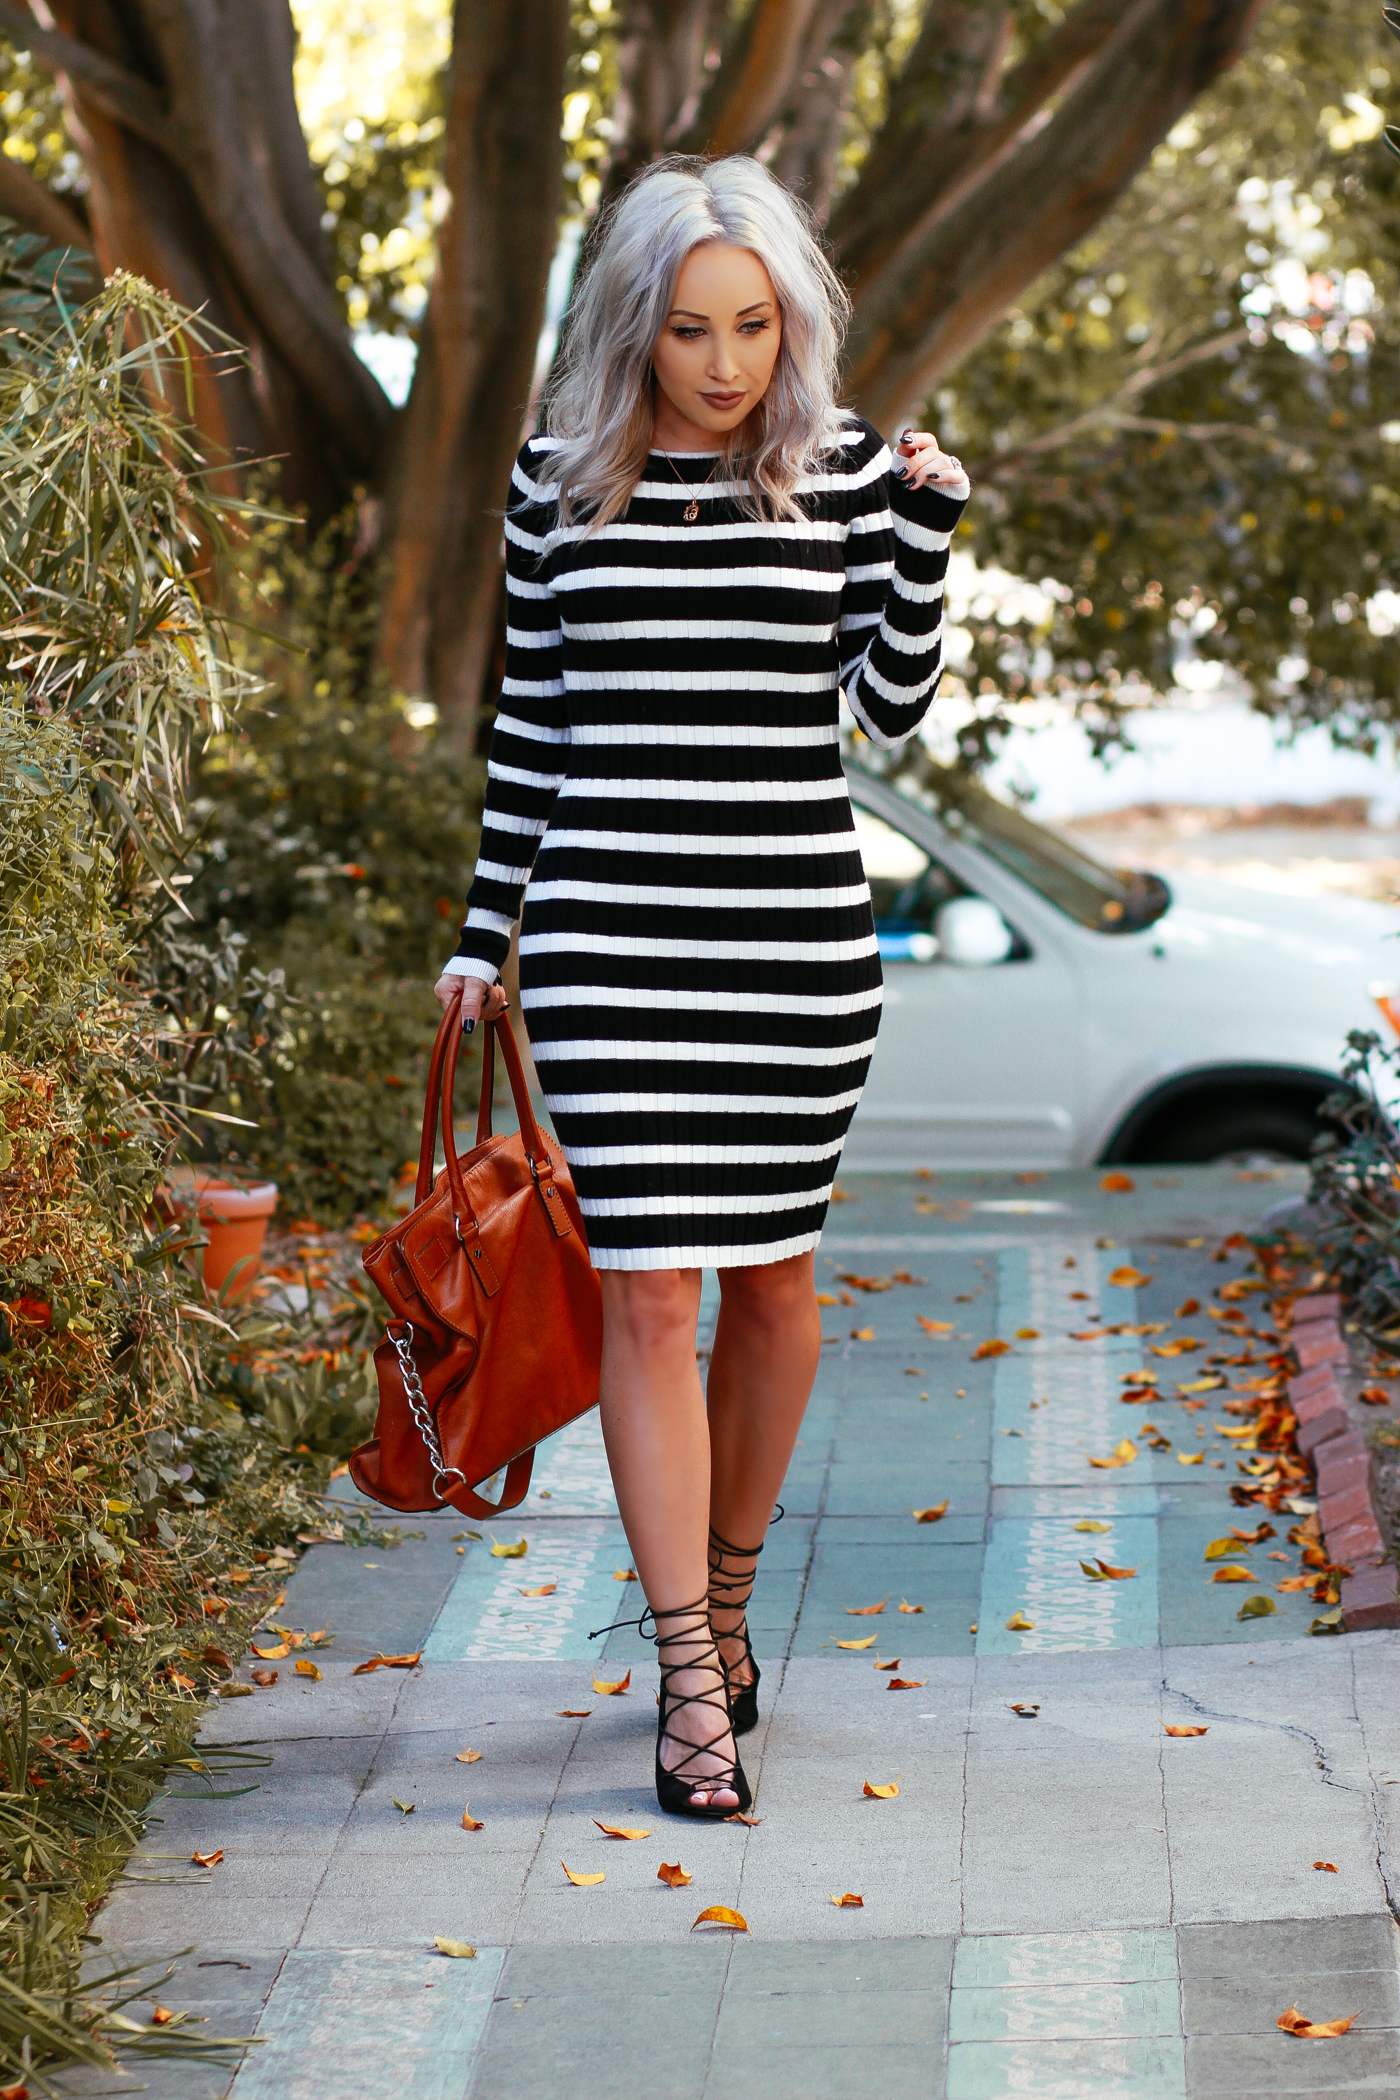 Blondie in the City | Cozy Striped Sweater Dress | @nakdfashion lace up heels | Fall Fashion Street Style